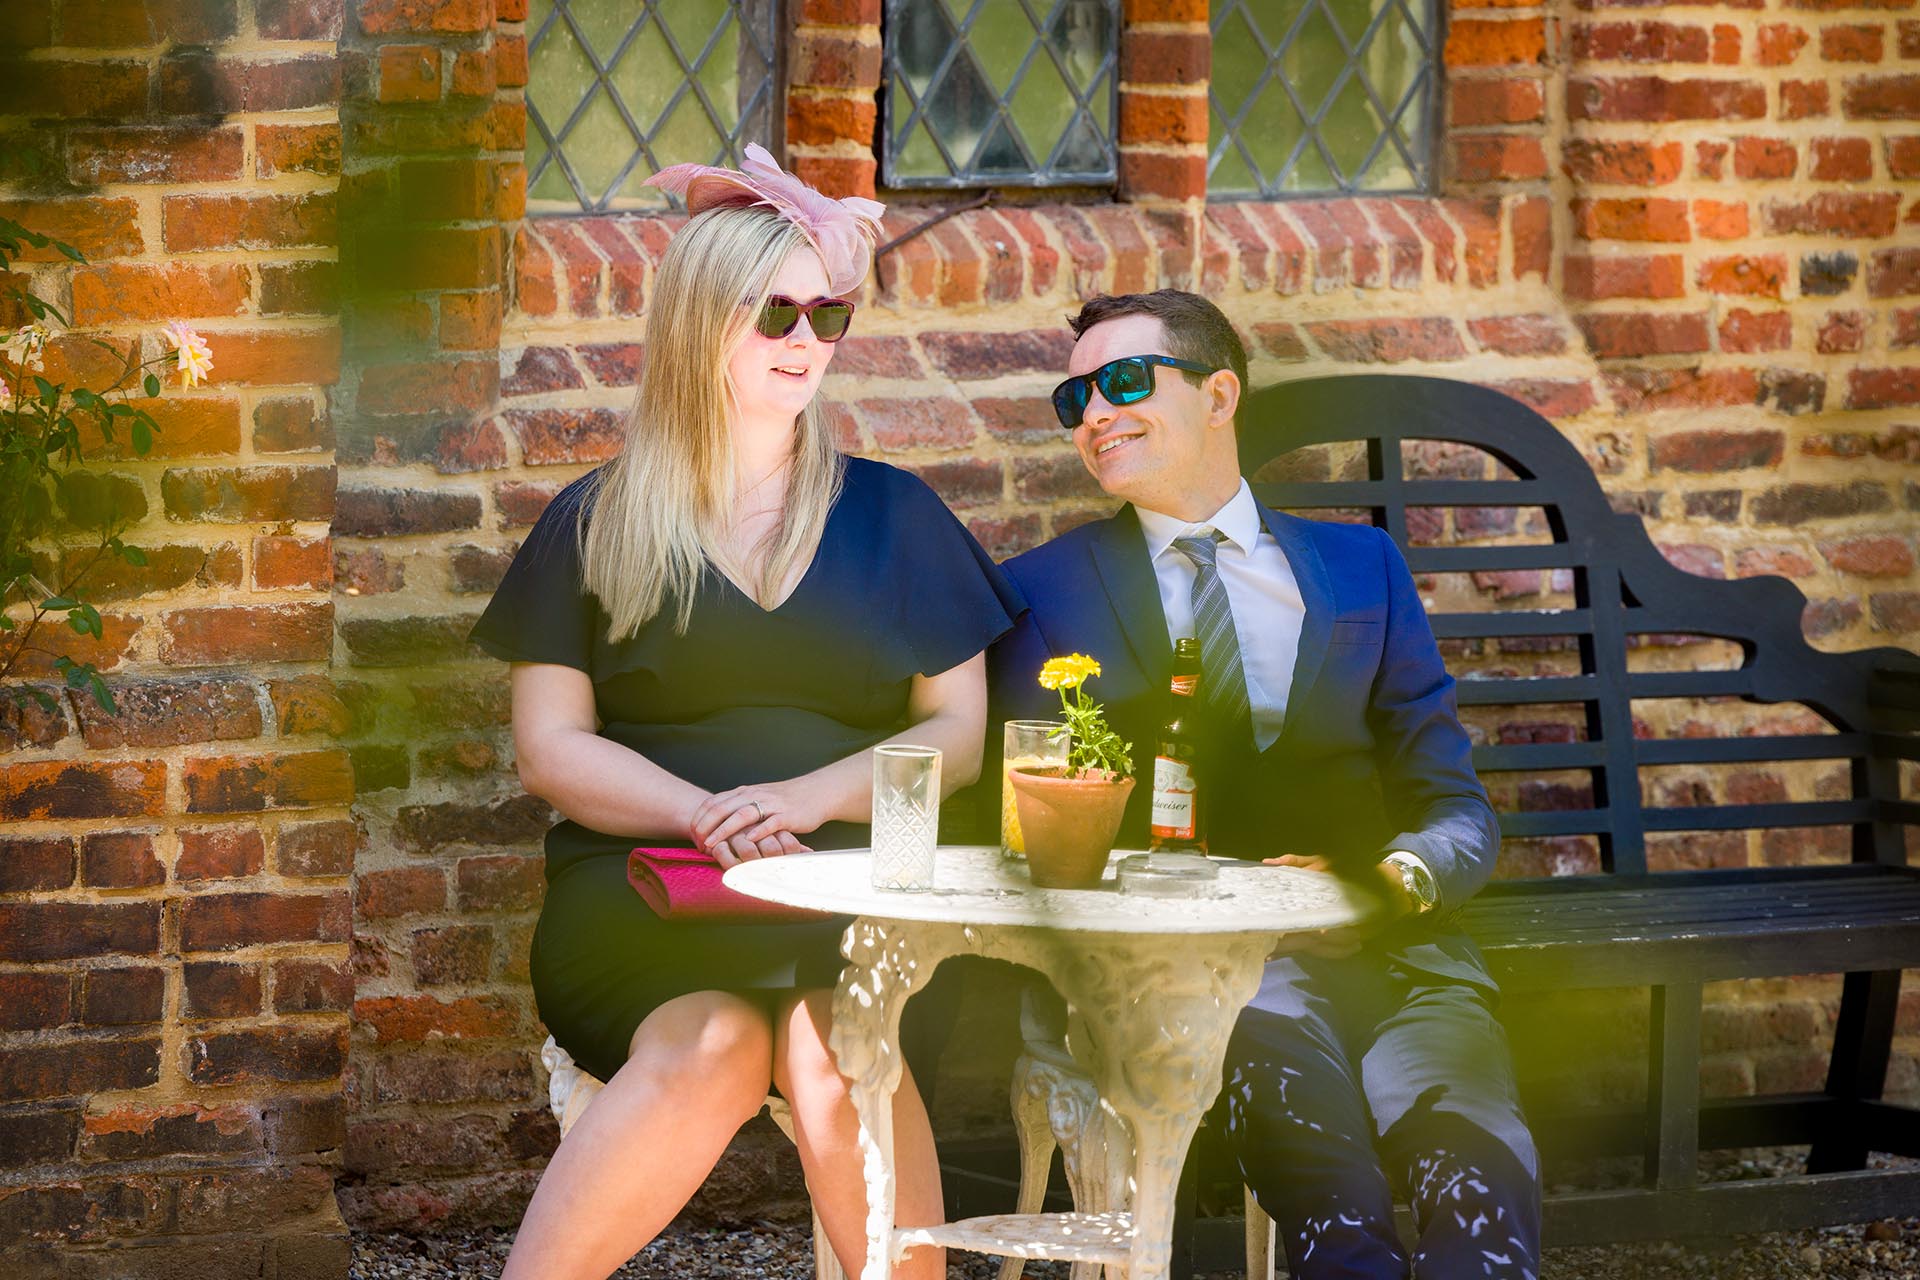 Wedding guests enjoying the summer sunshine at Leez Priory, Great Leighs, Chelmsford